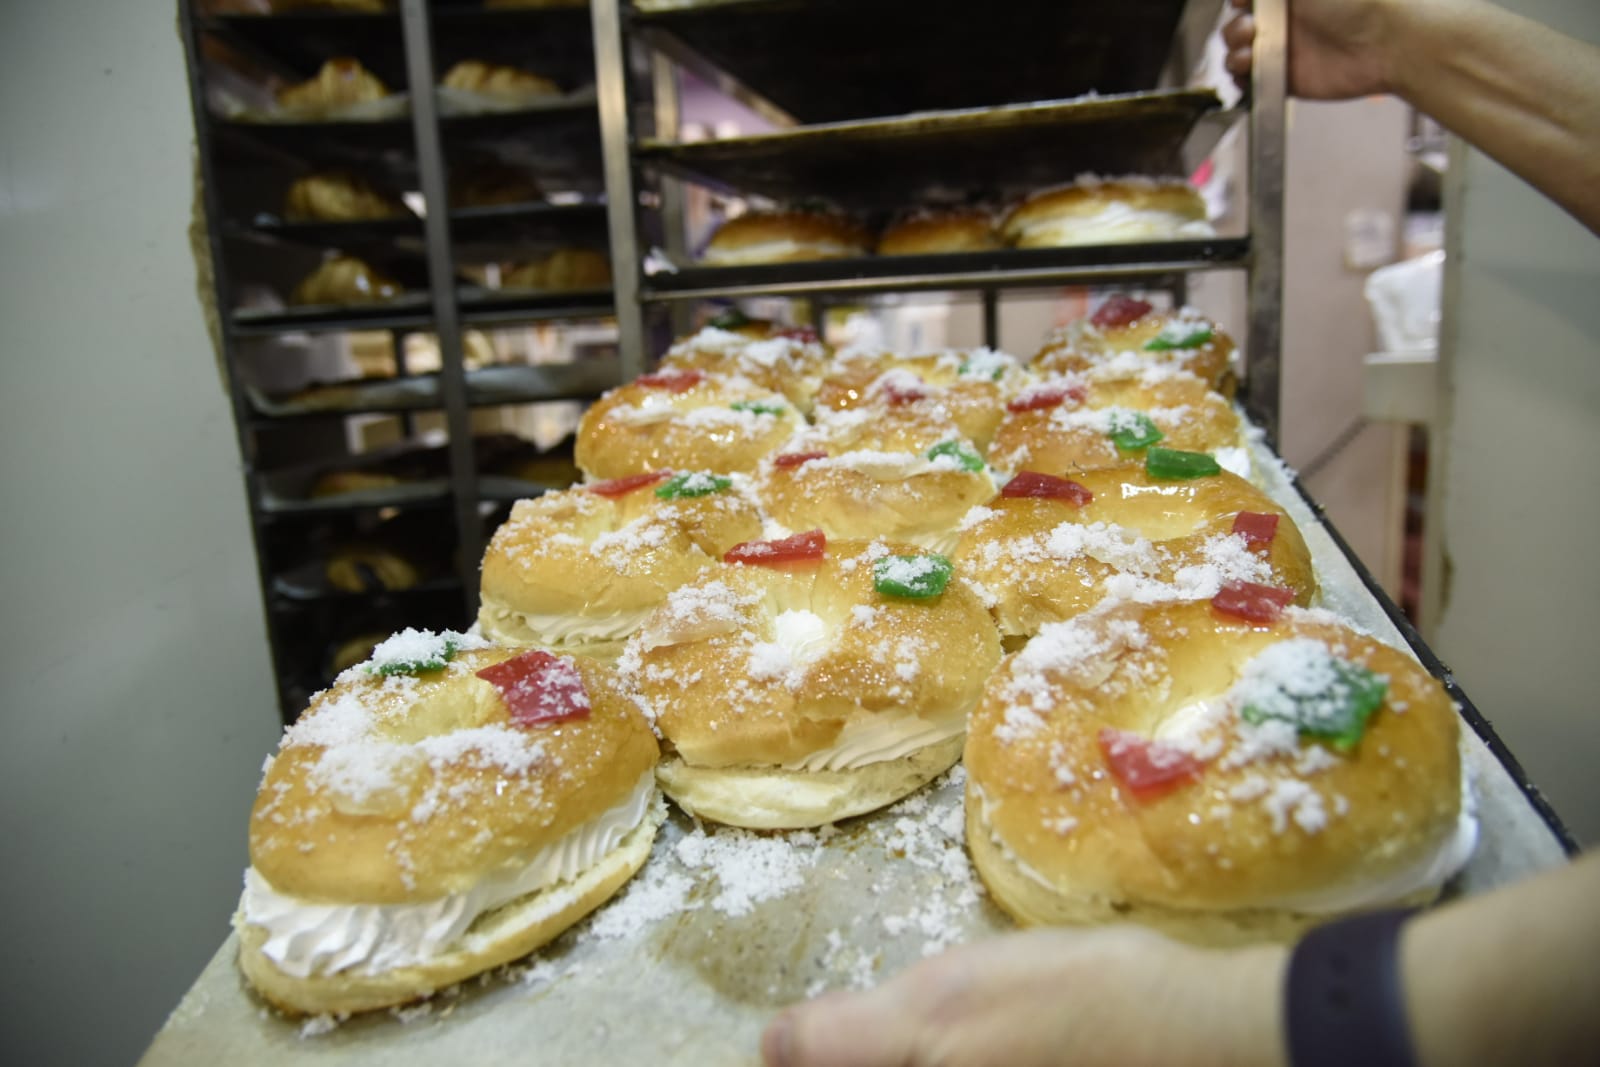 Seventeen shops and bakeries are participating in the King's cake route in Torremolinos. 